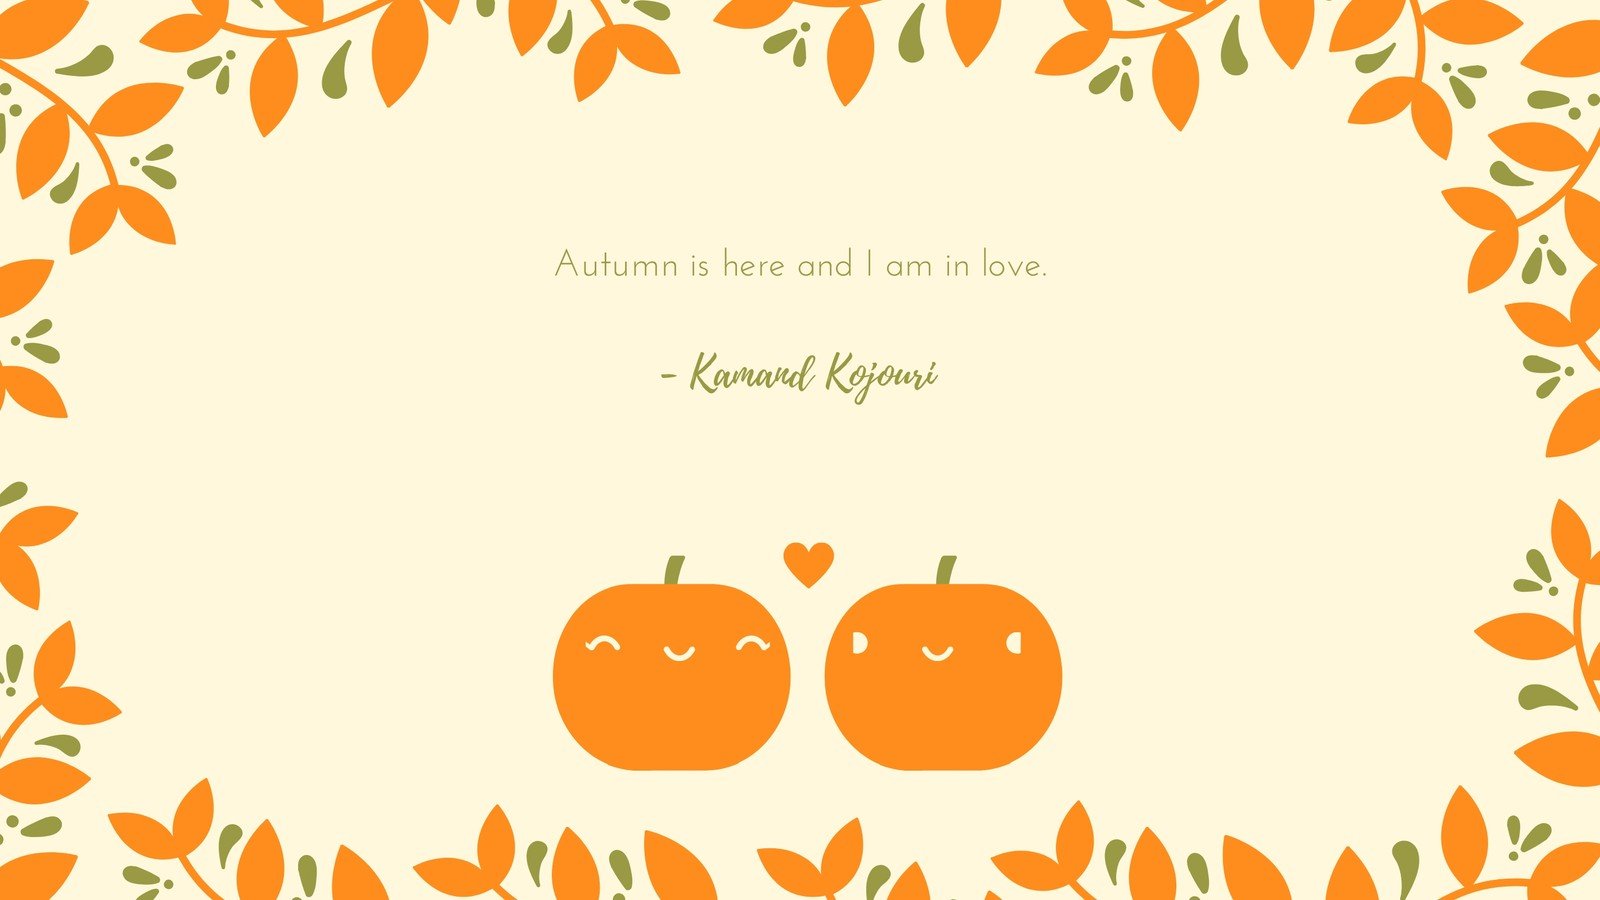 A wallpaper with a quote by Karuizaki Reijiro and two pumpkins with faces. - Cute fall